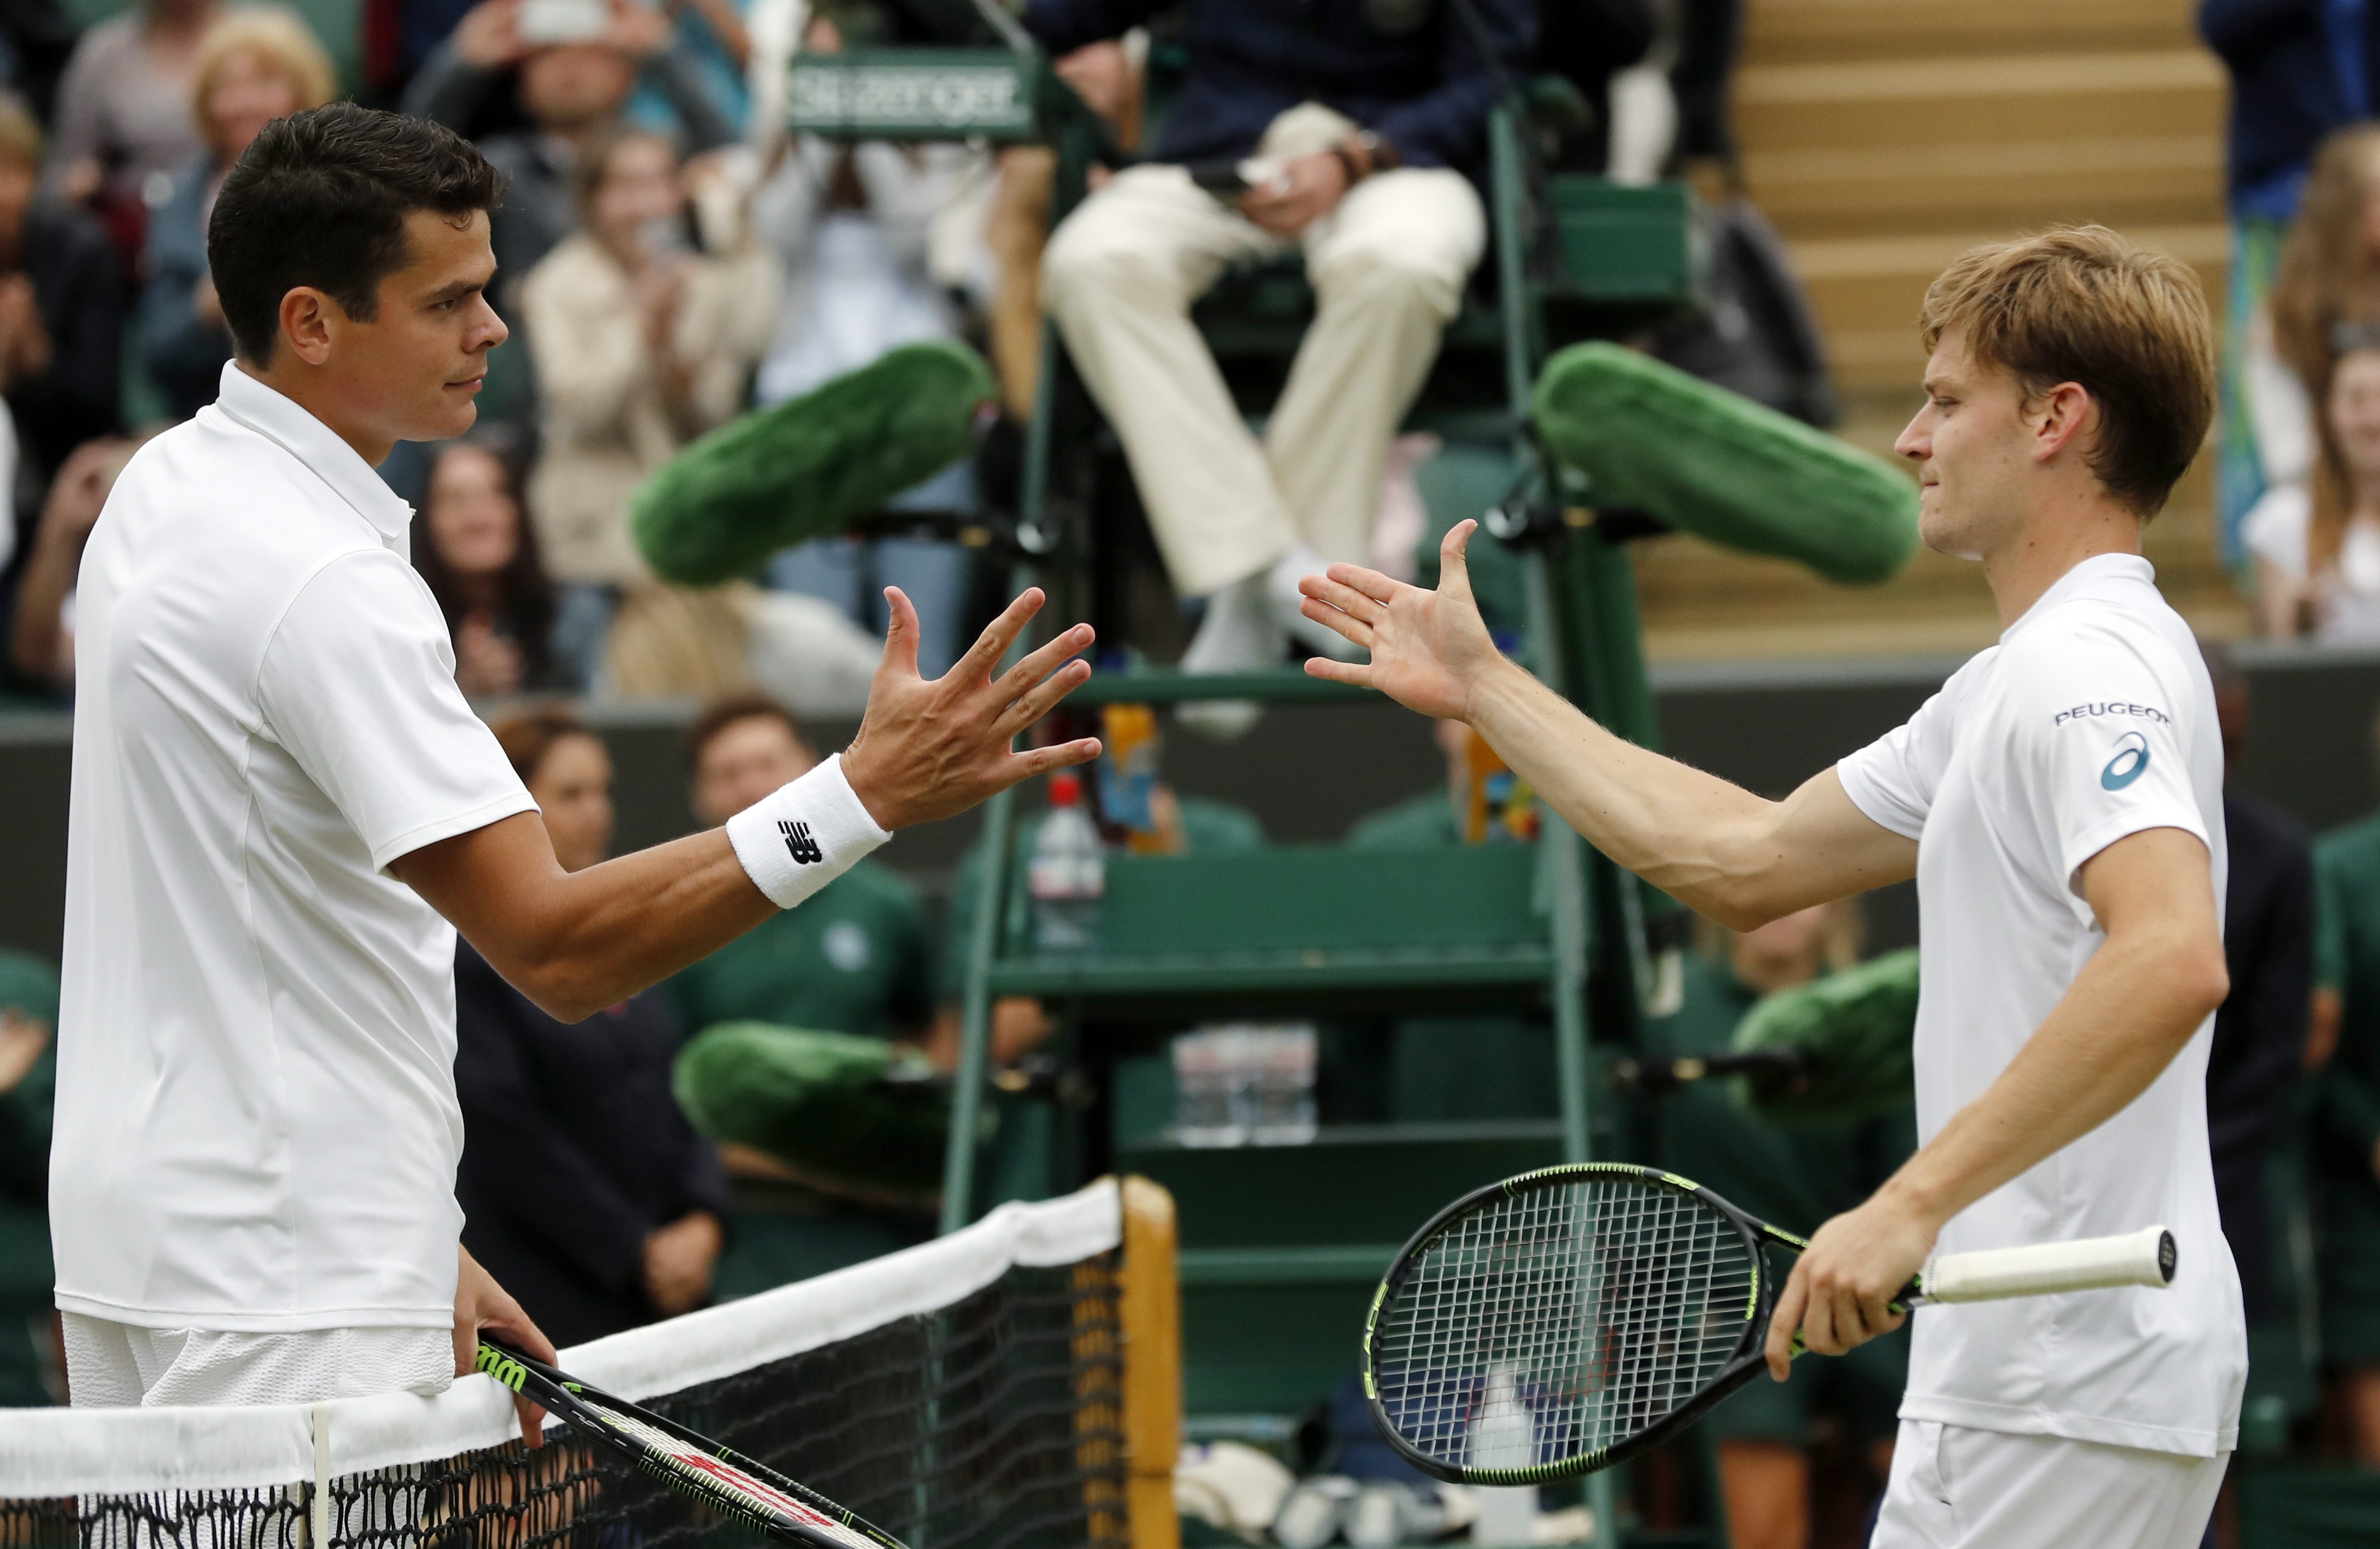 Milos Raonic of Canada, left, shakes hands with David Goffin of Belgium after beating him in their men's singles match on day eight of the Wimbledon Tennis Championships in London, Monday, July 4, 2016. (AP Photo/Ben Curtis)